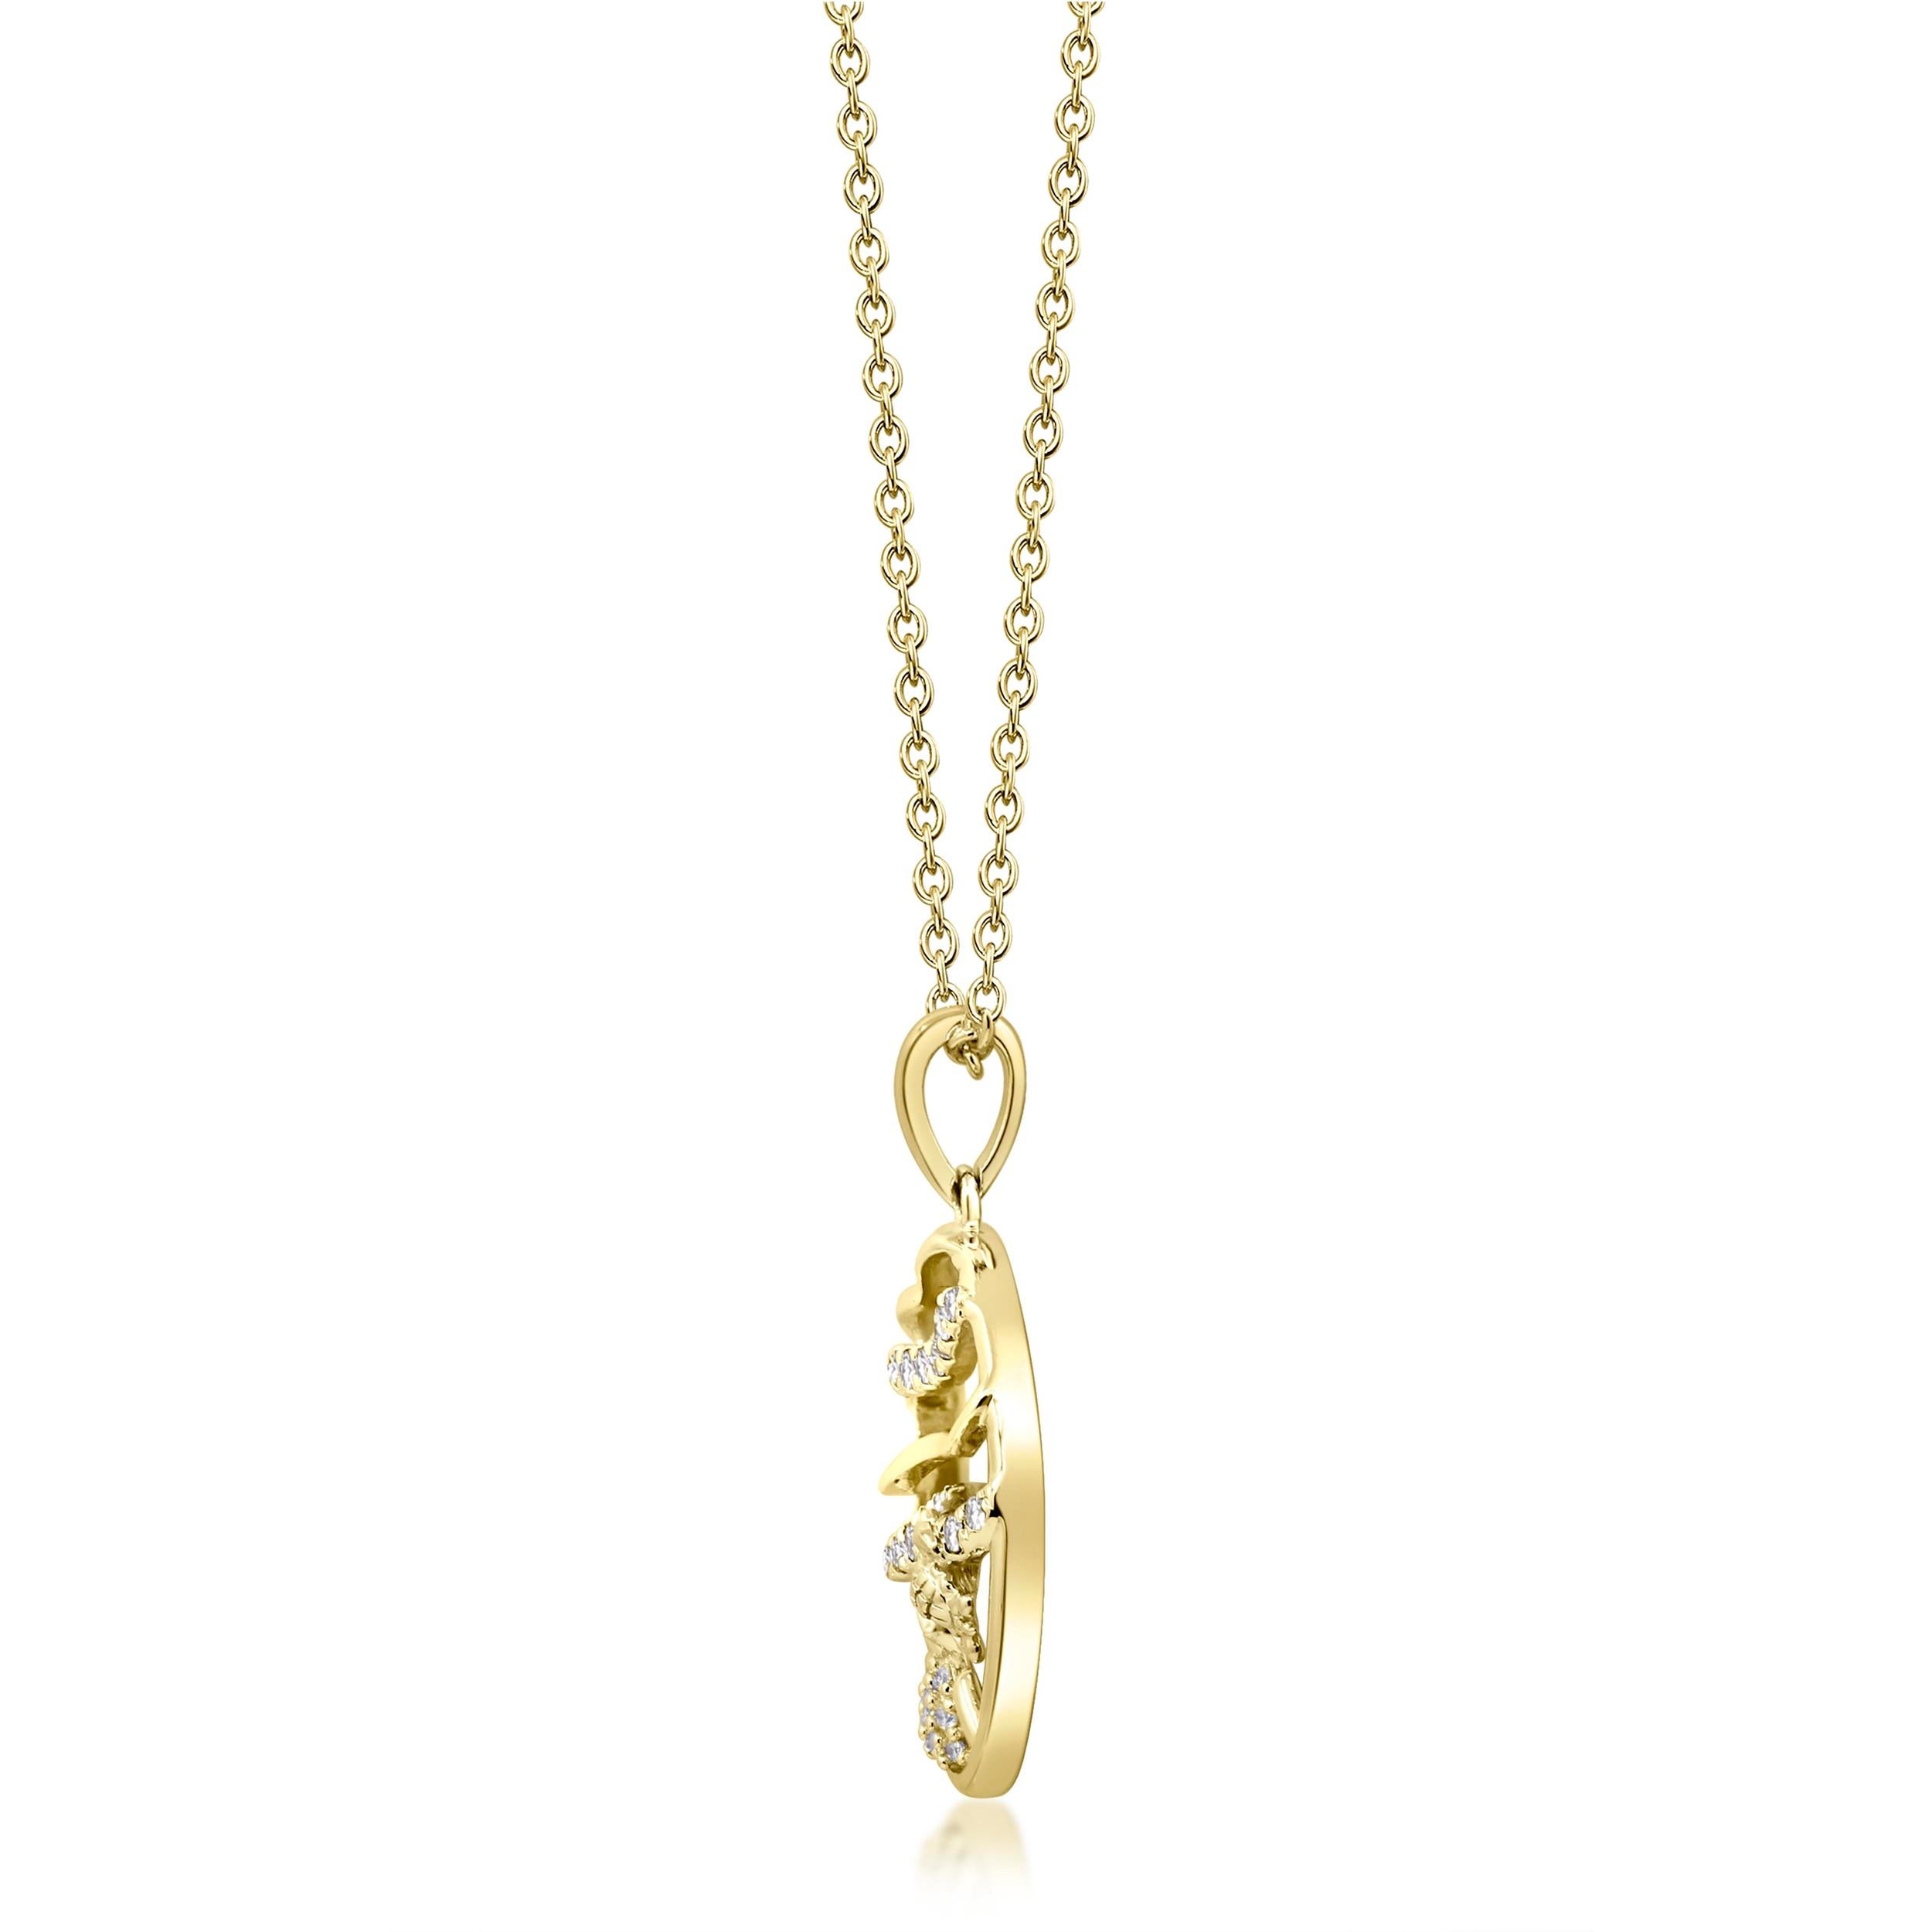 * Captivating Mama turtle and a baby turtle on a swim necklace from Smithsonian Museum collection designed by Gin and Grace is made of 14K Yellow Gold. The cluster design features Starfish hanging with Shell and Snail.
* The Smithsonian Jewelry